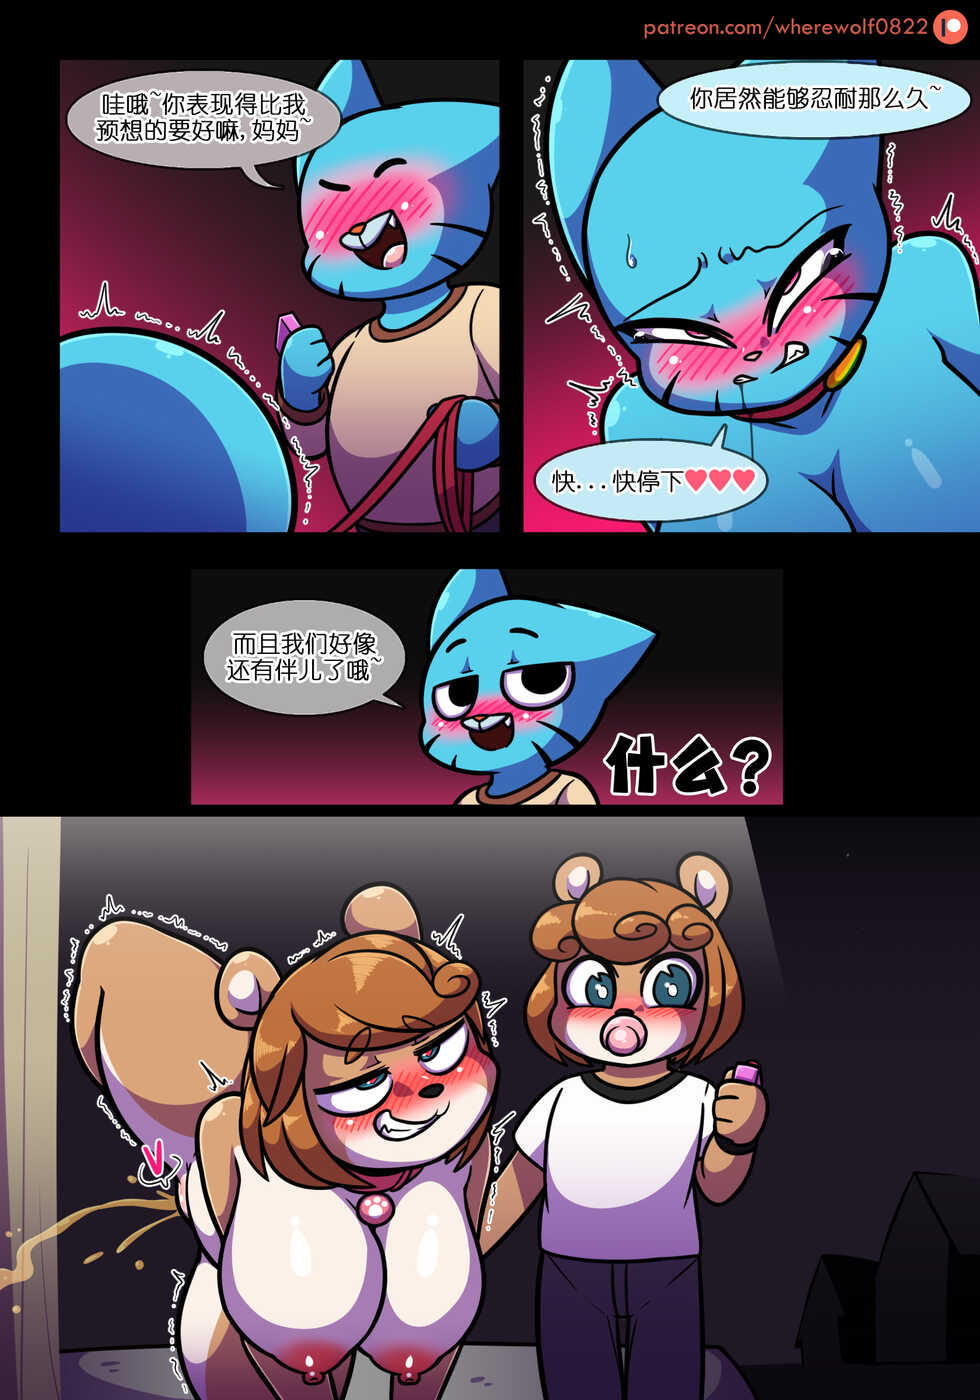 [Wherewolf] Lusty World of Nicole Ep. 5 - Controller pet [CN] - Page 13